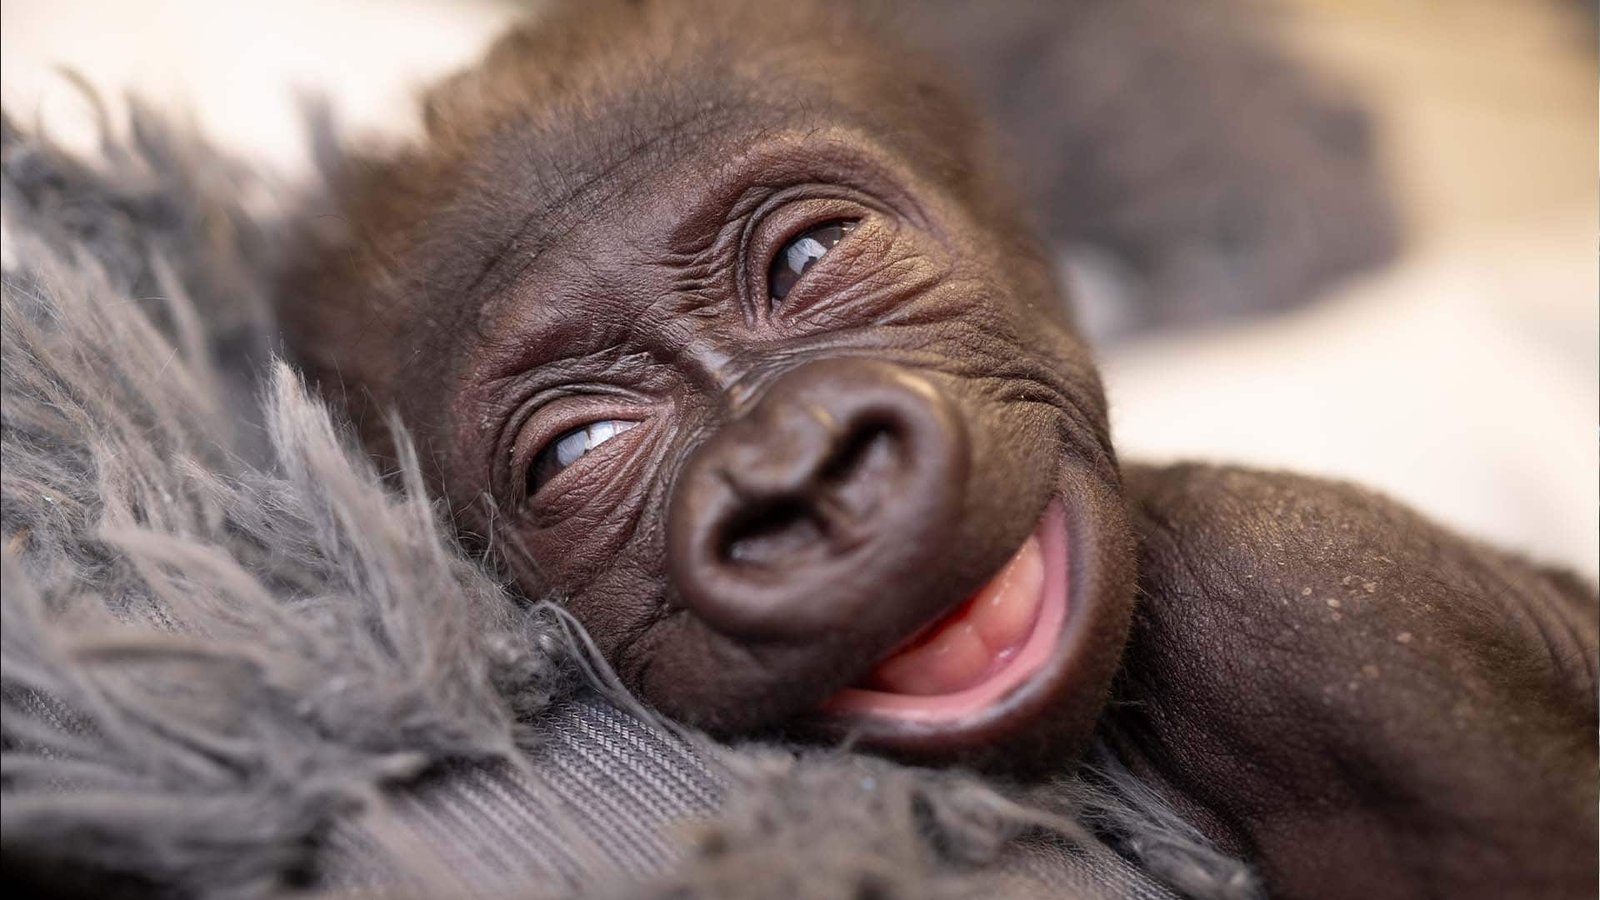 #TheMoment a medical doctor delivered a baby gorilla